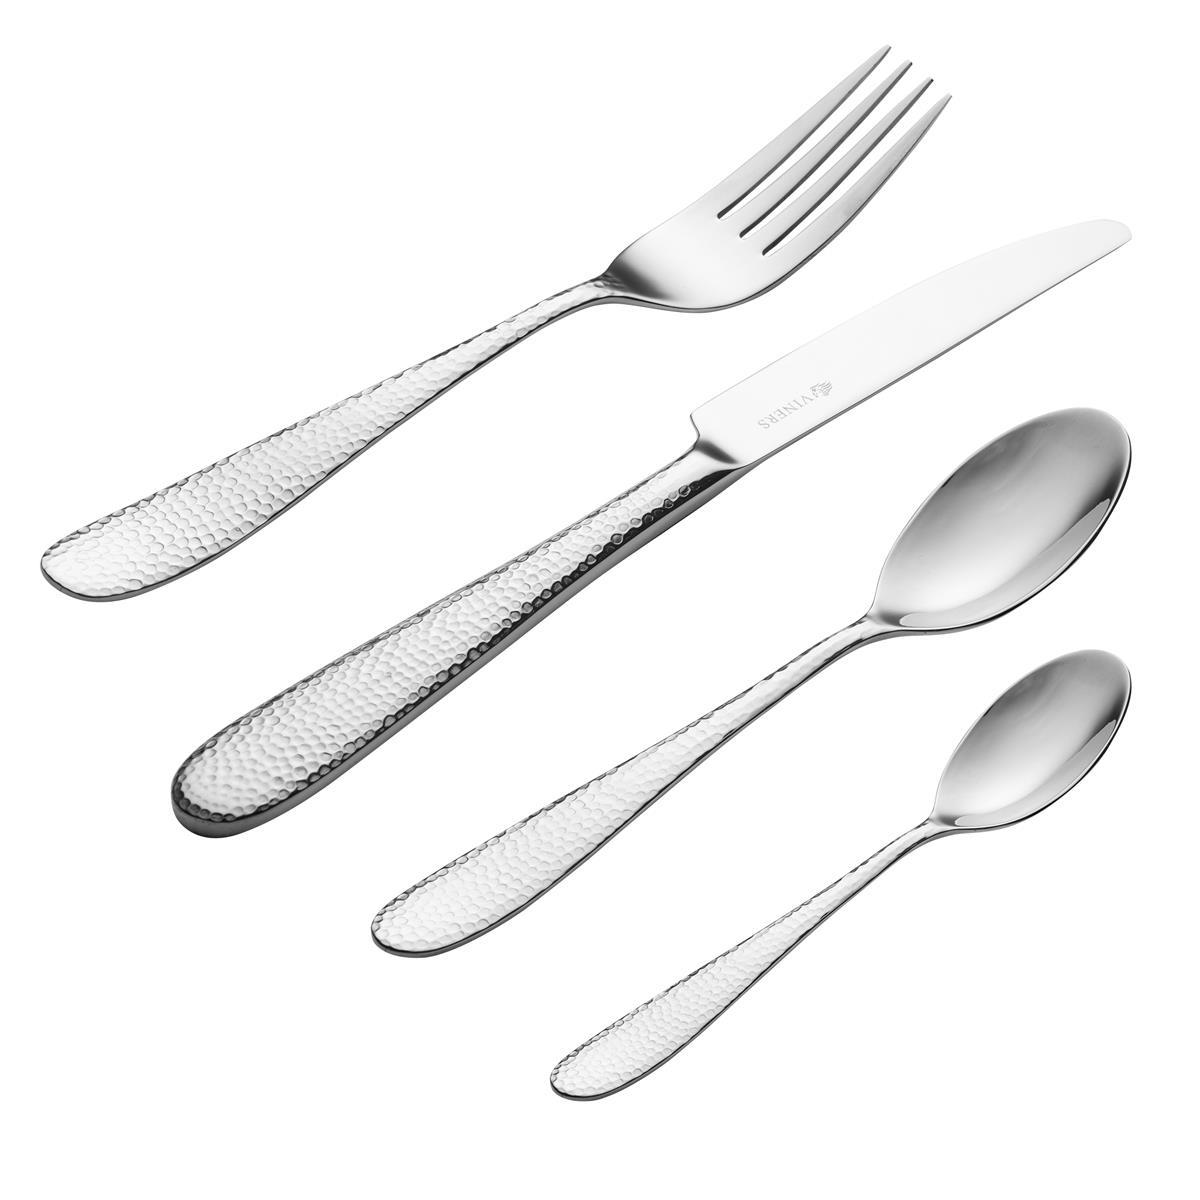 What are the features of the Viners Glamour Cutlery Set?